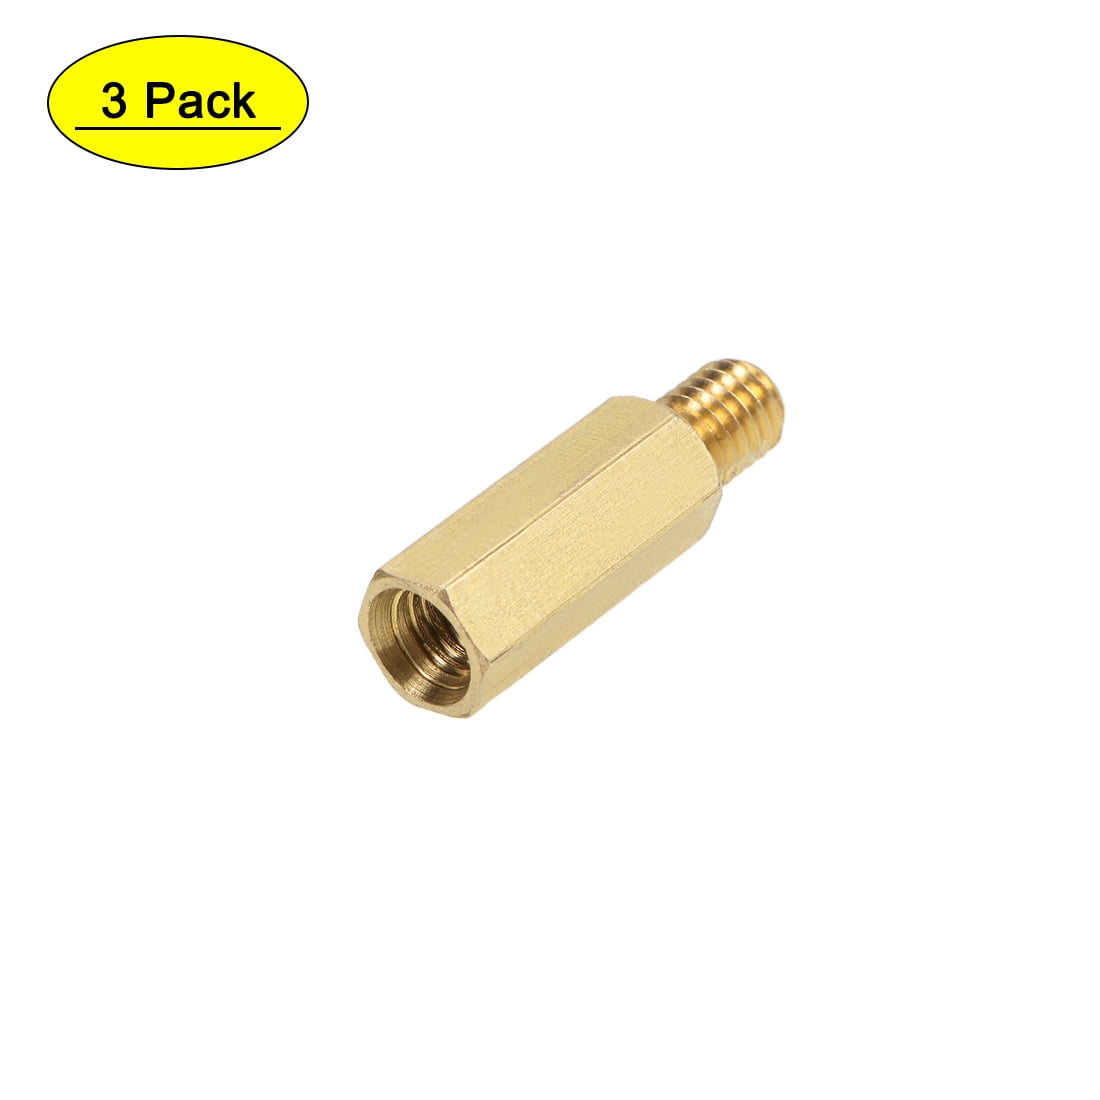 8 mm Male to Female Hex Brass Spacer Standoff 3pcs M6 x 20 mm 